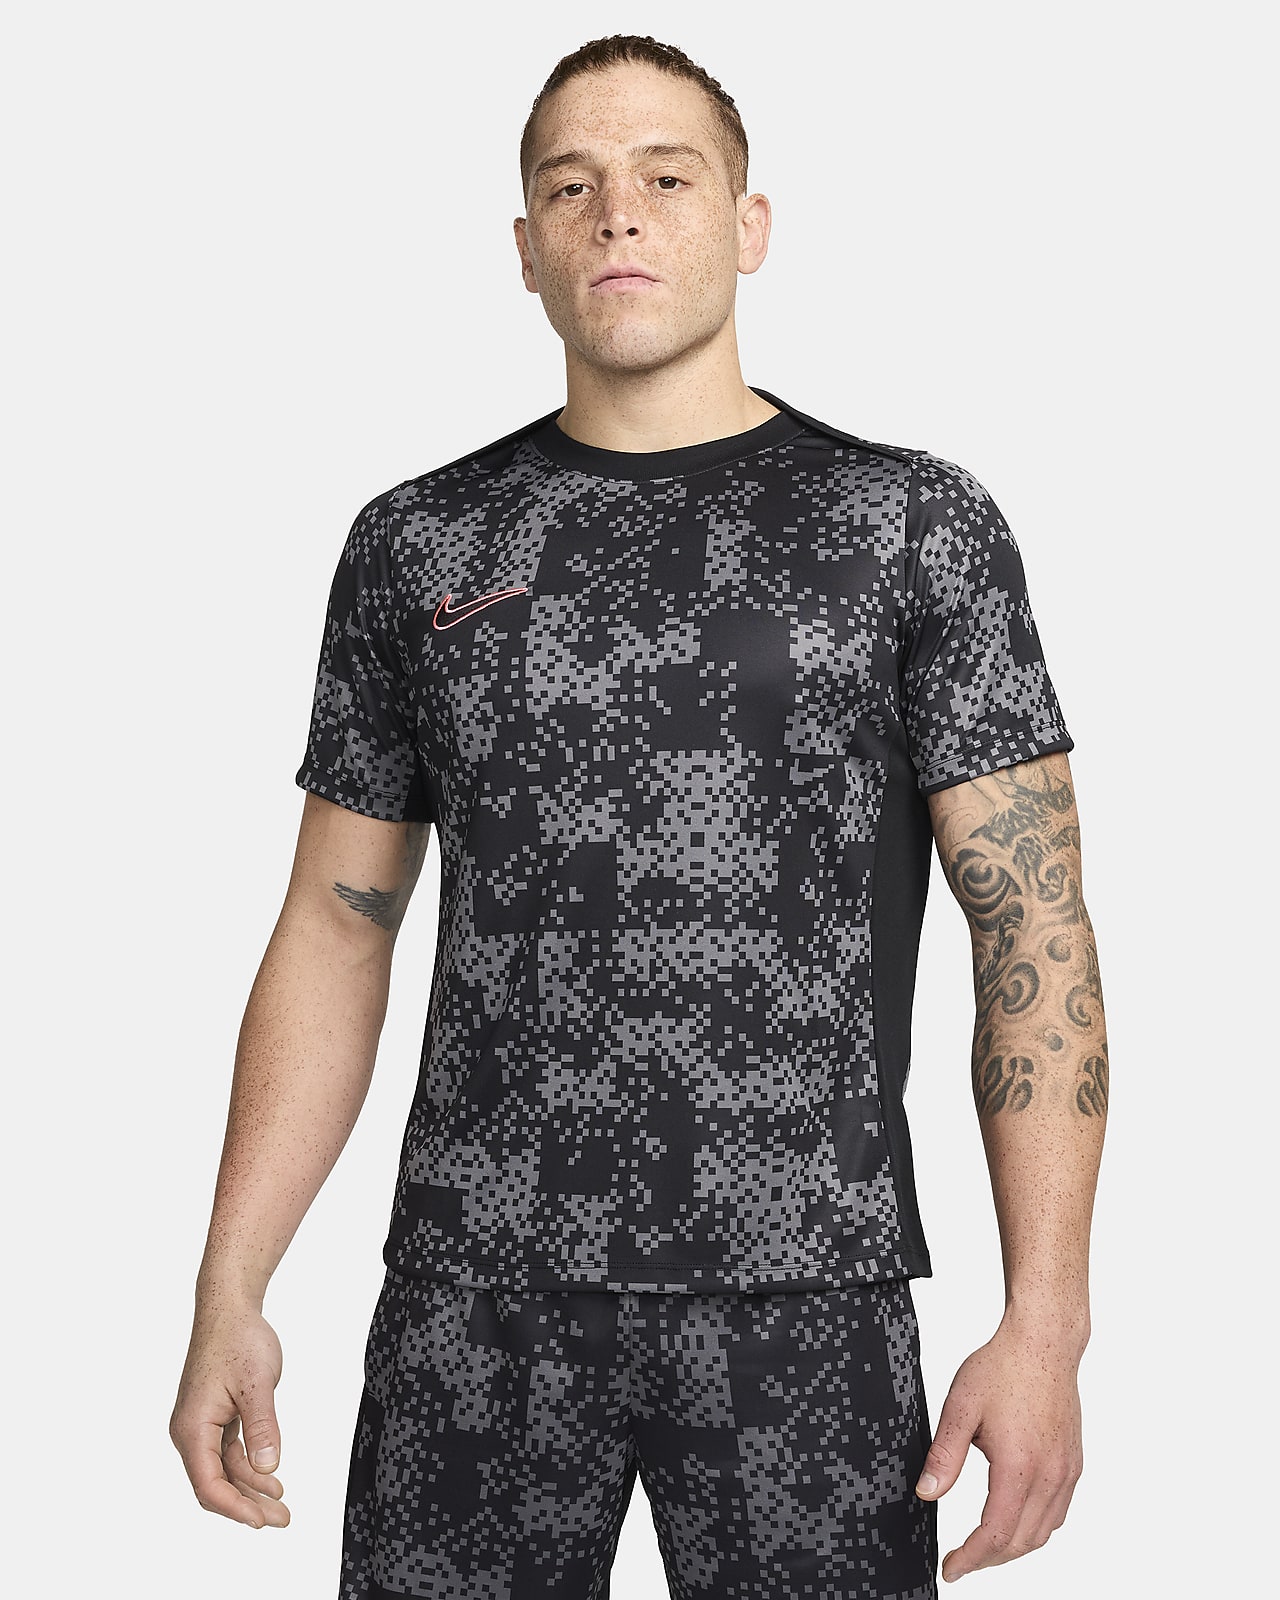 Nike Academy Pro Men's Dri-FIT Soccer Short-Sleeve Graphic Top